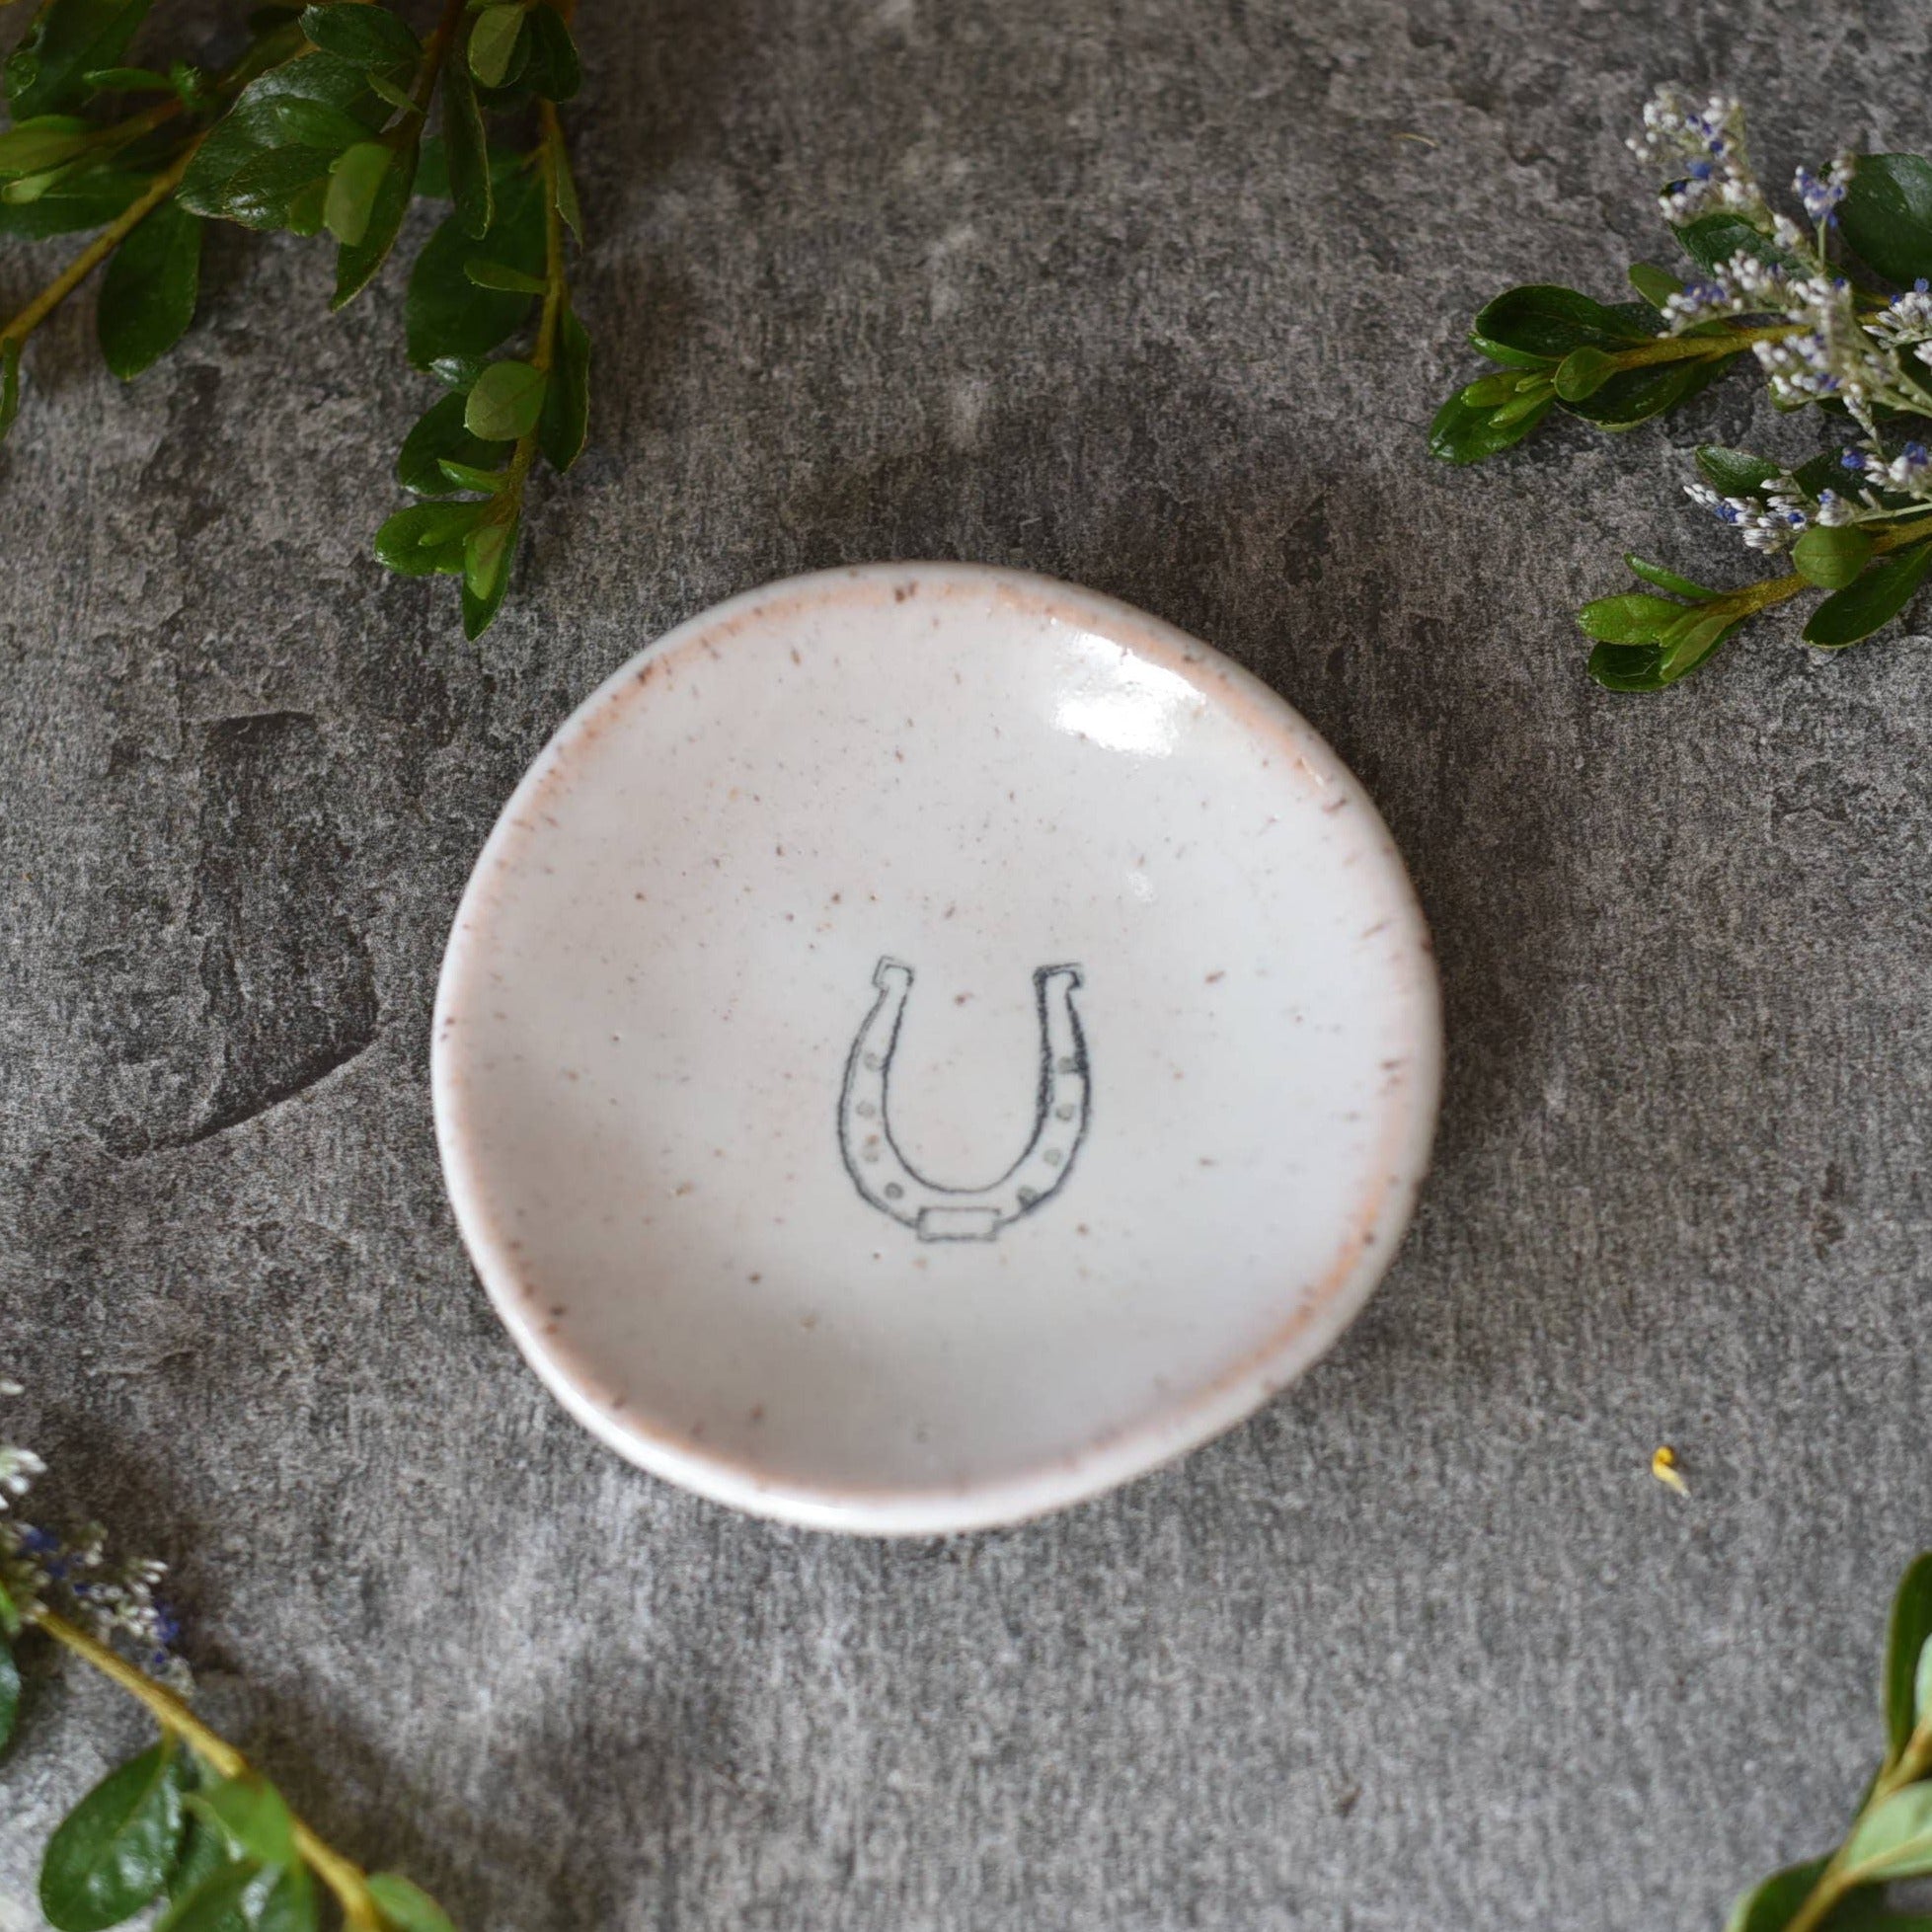 Small deep circle dish with horse shoe printed in center